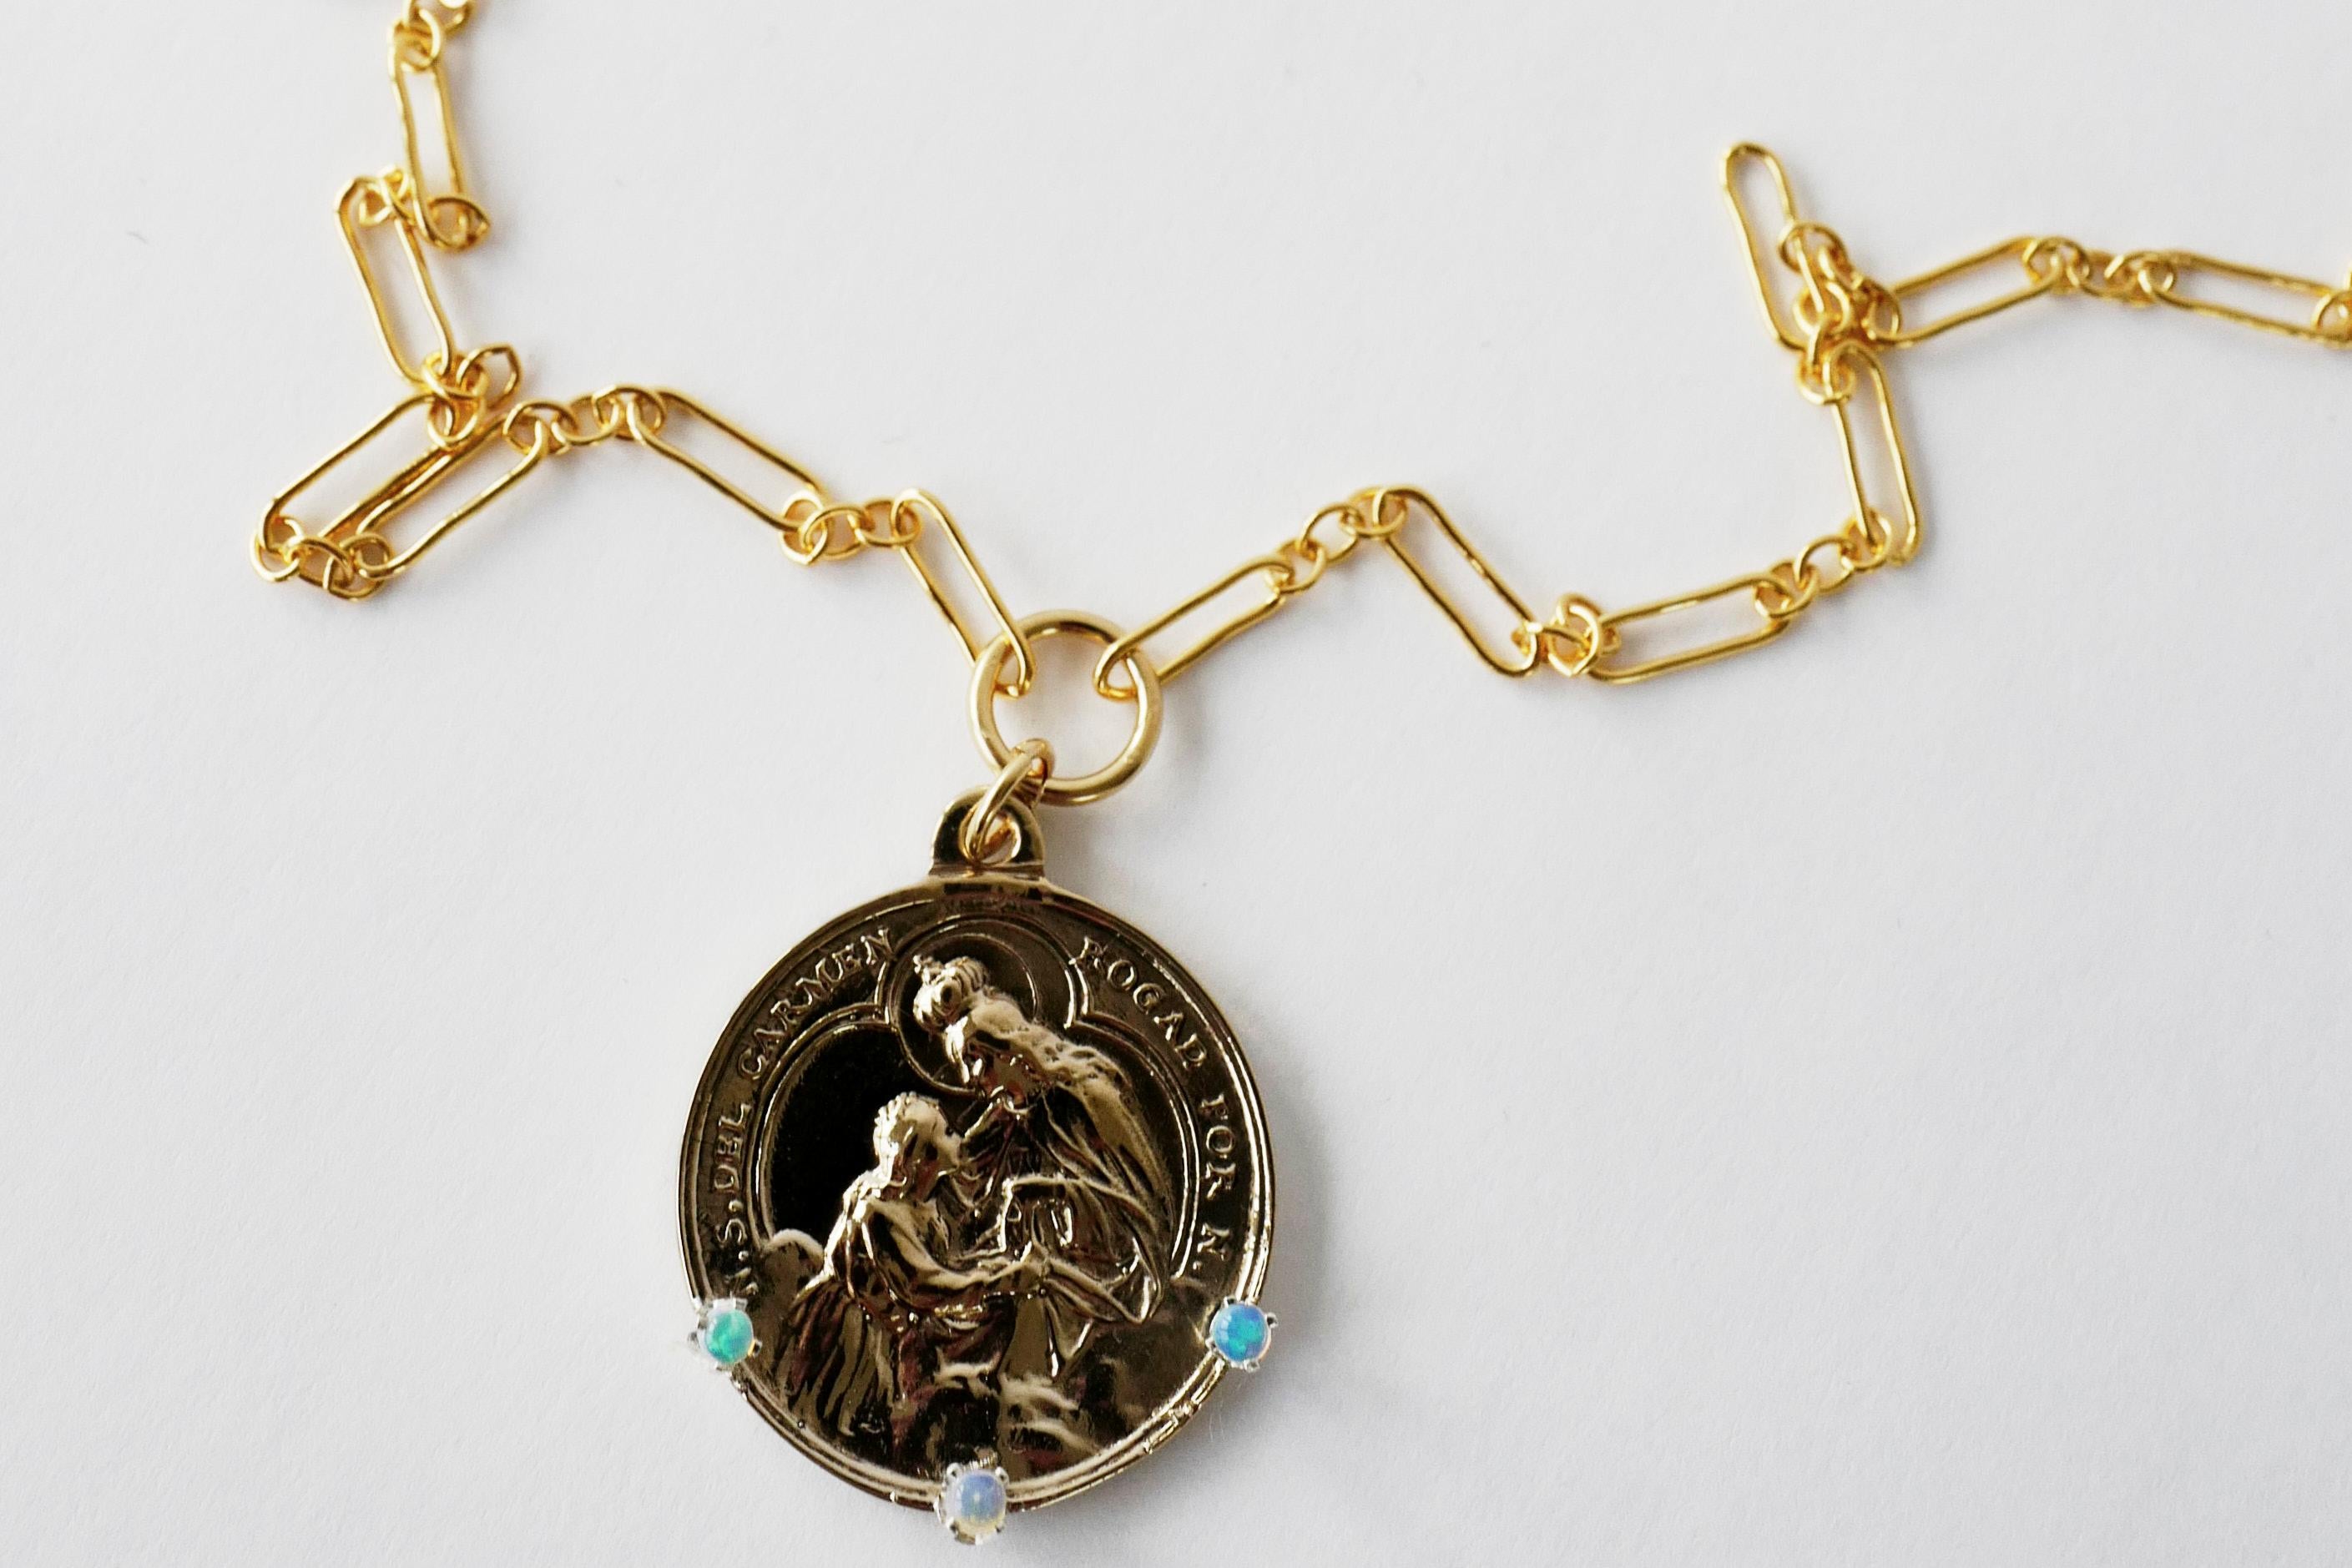 Victorian Medal Necklace Chain Virgin Mary Opals Round Coin Pendant J Dauphin For Sale